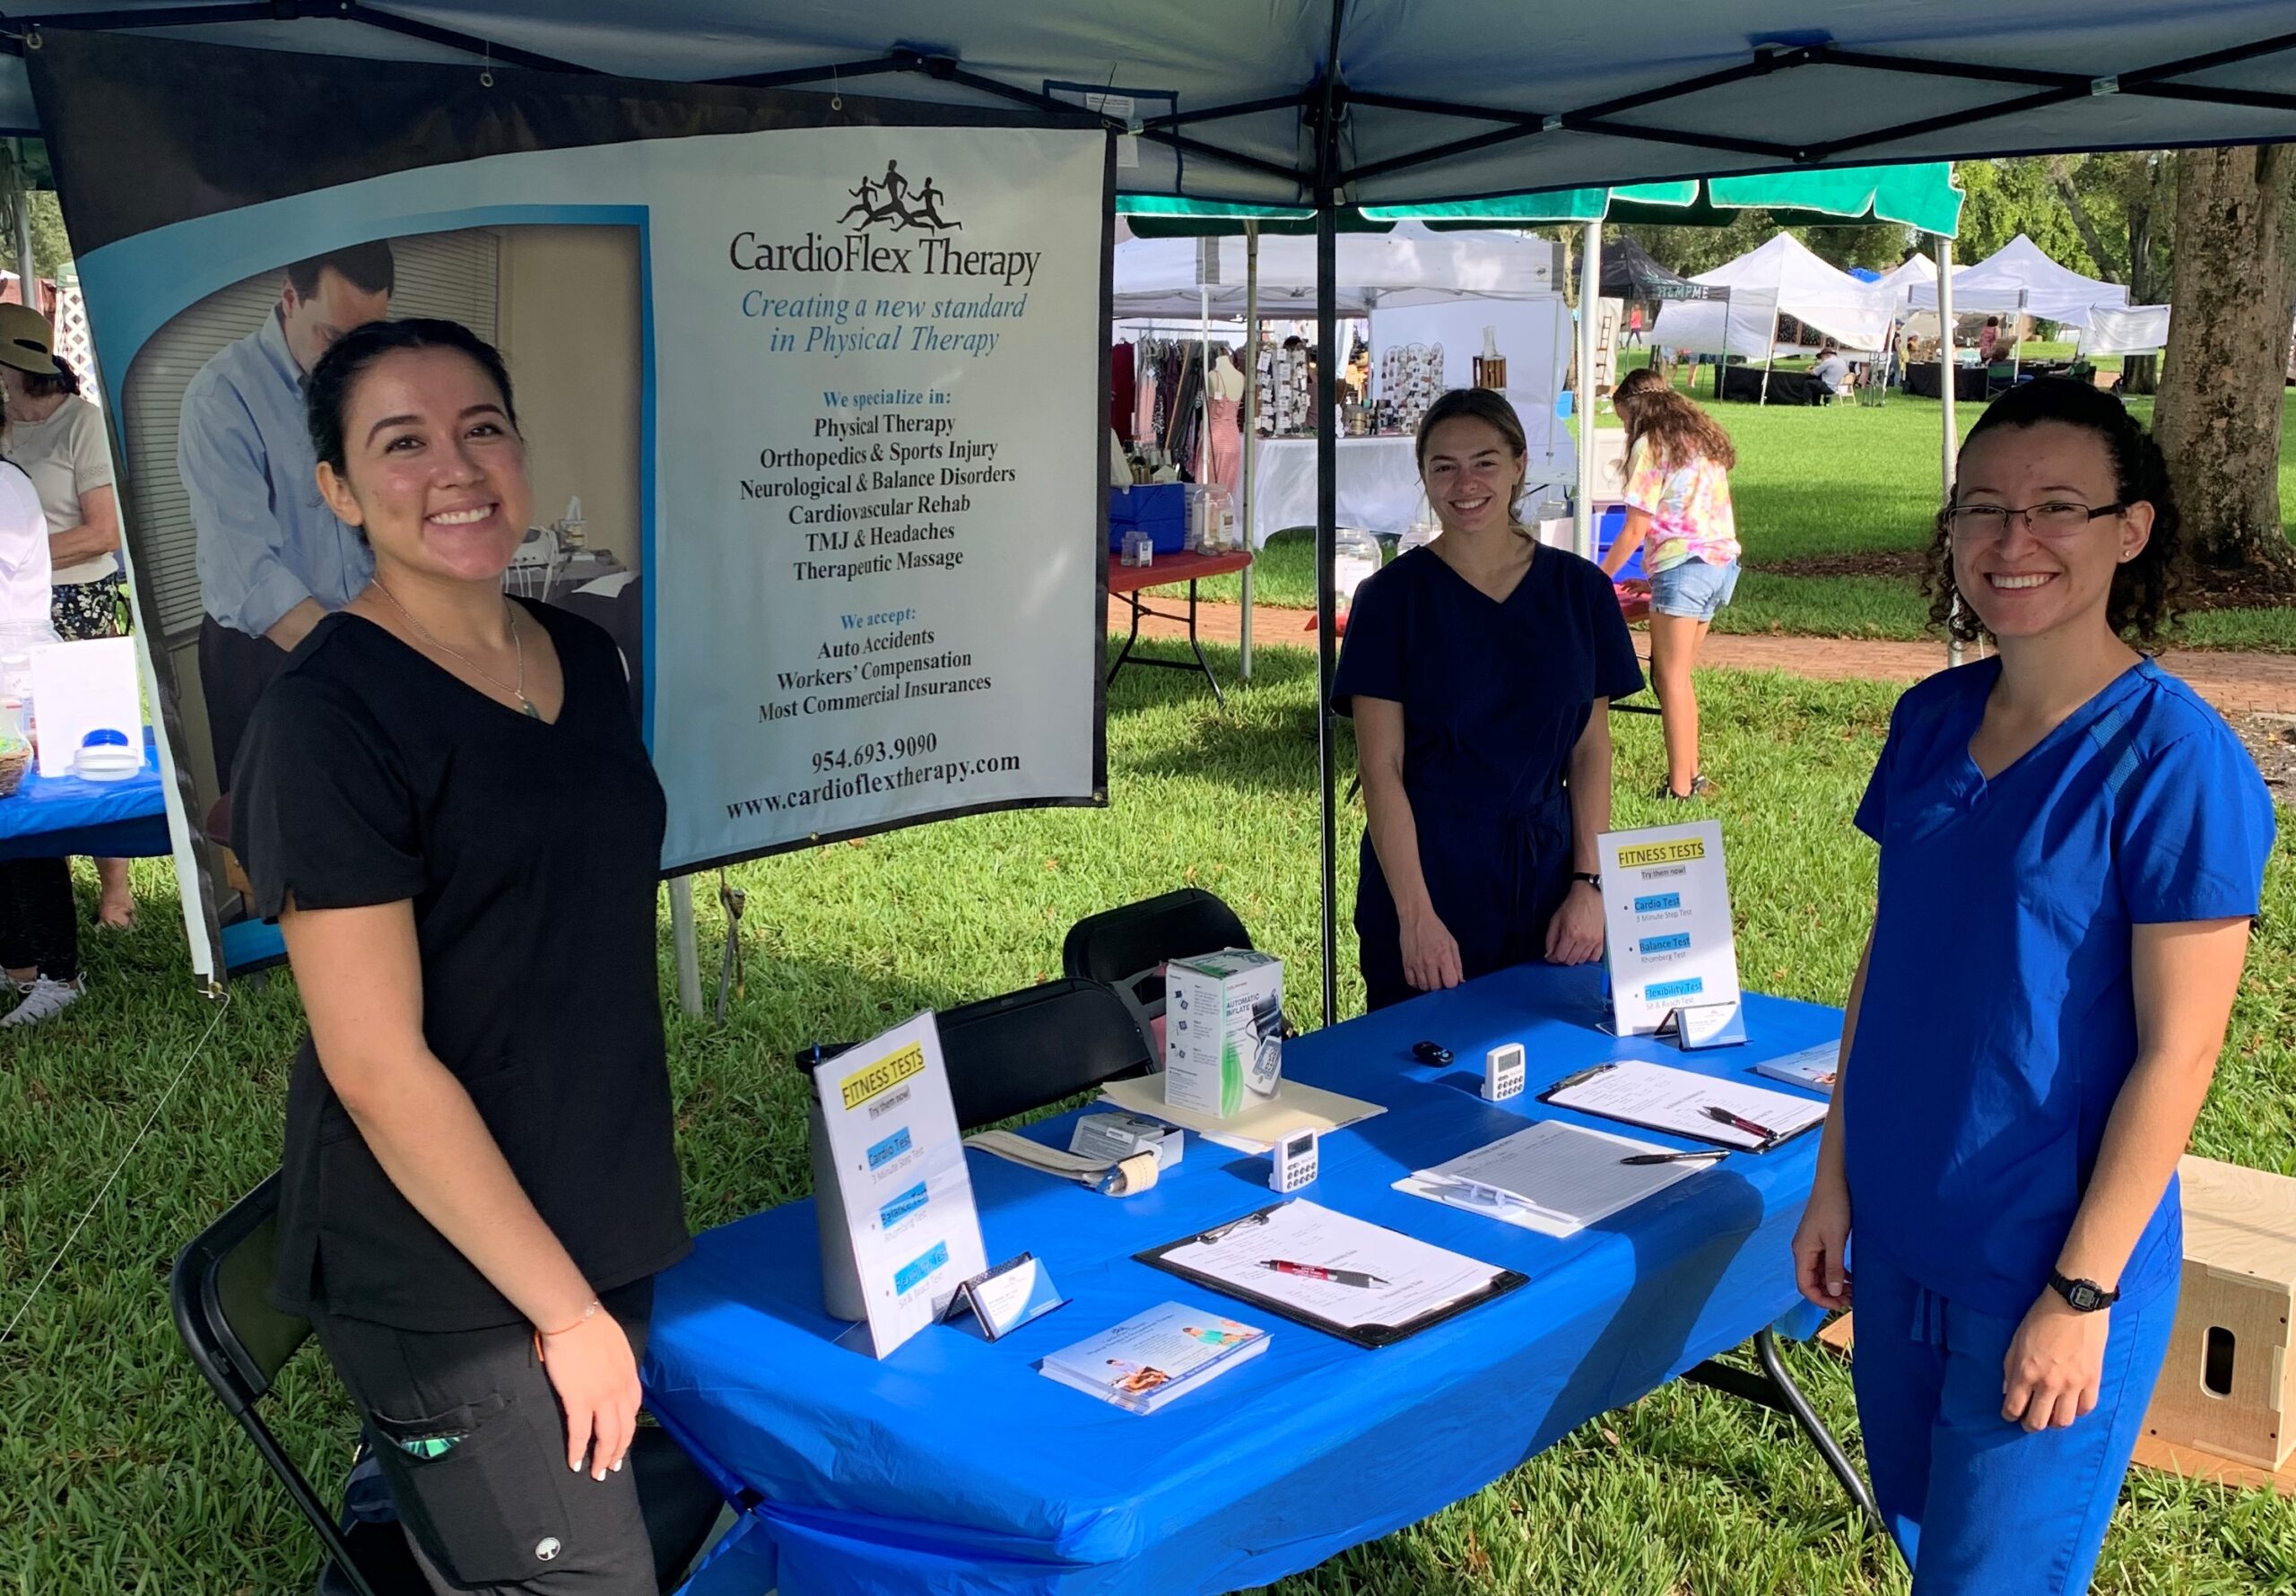 CardioFlex therapists taking a group picture during the Art in the Park event discussing their physical therapy Davie Florida services